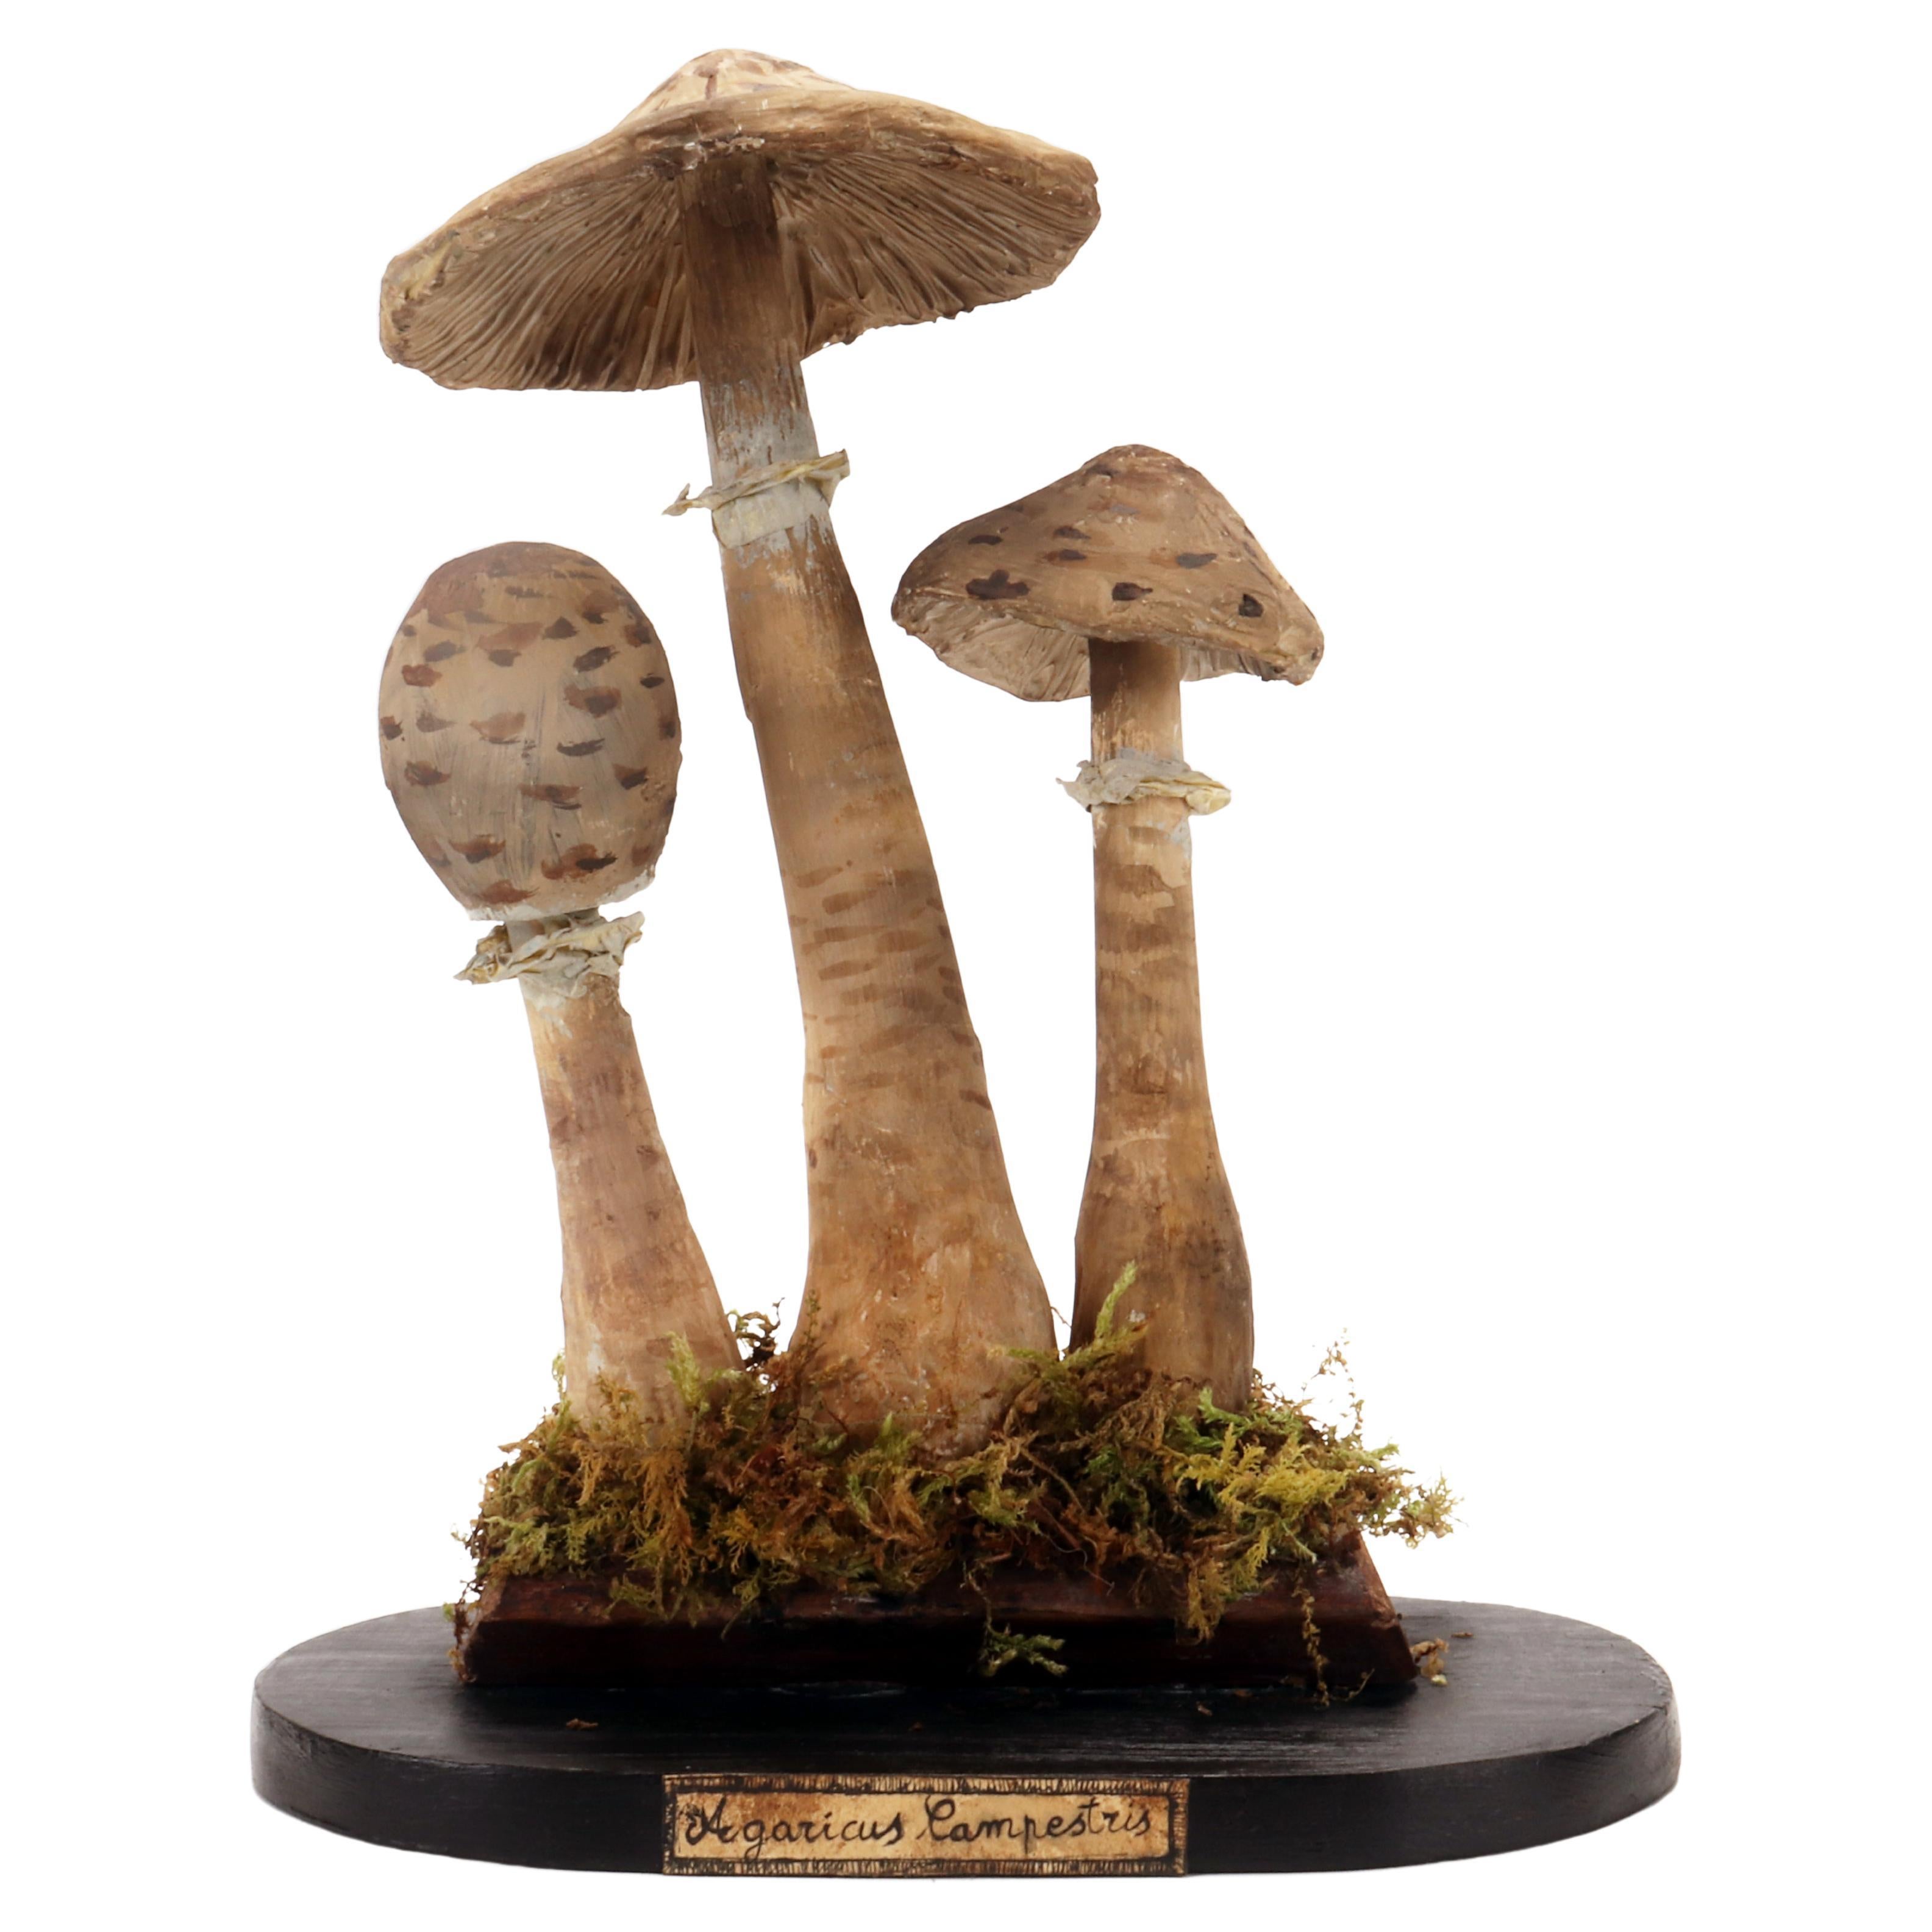 A mushrooms models: Agaricus Campestris, Germany 1890.  For Sale